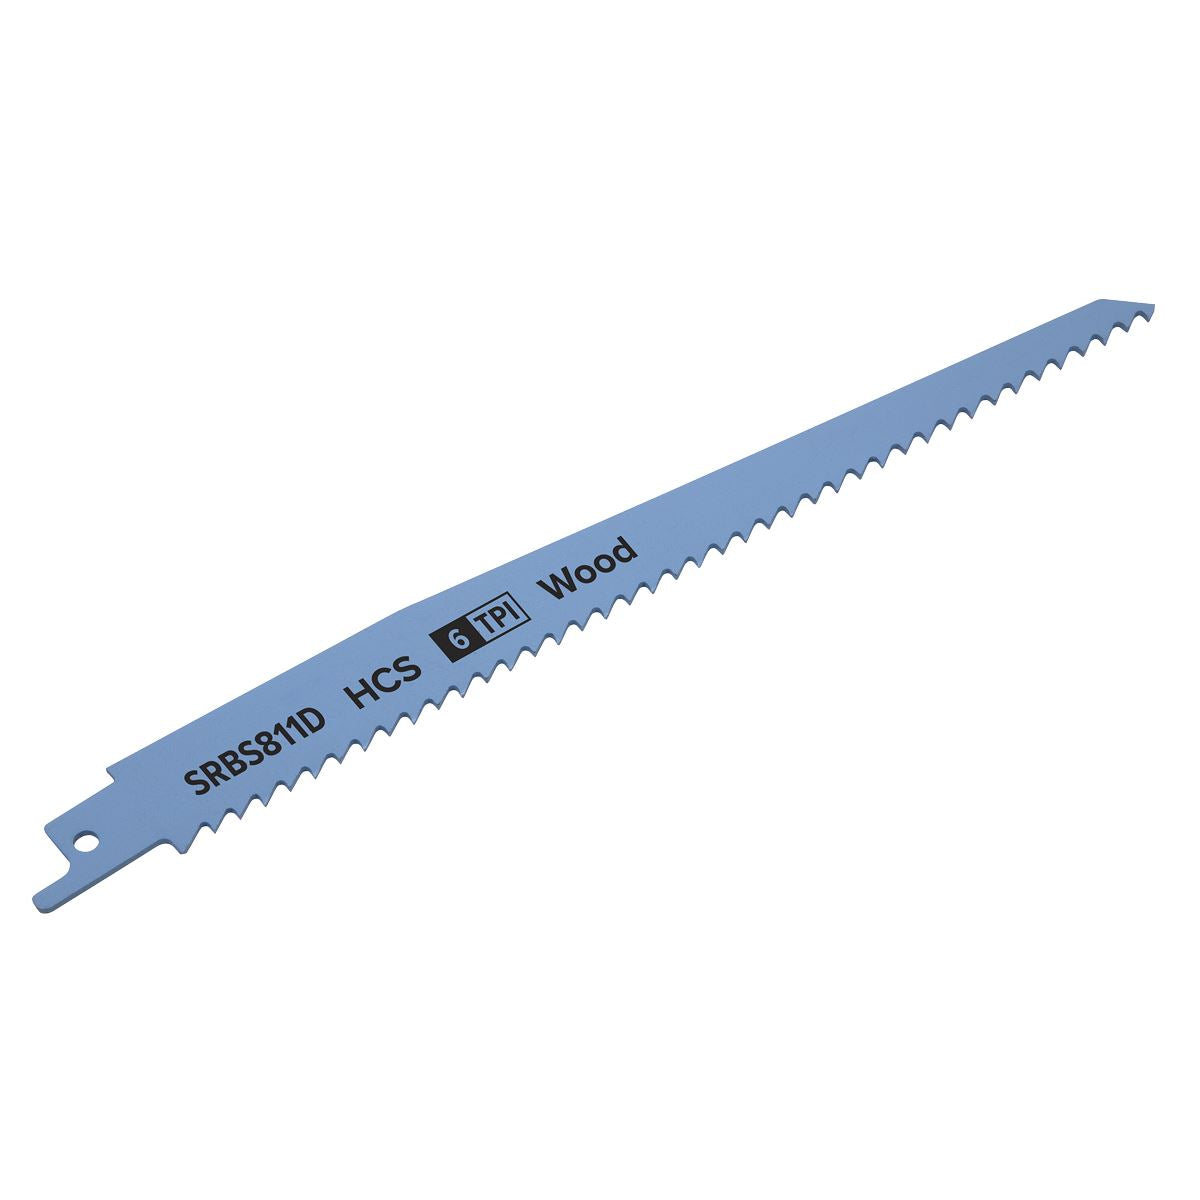 Sealey Reciprocating Saw Blade Clean Wood 200mm 6tpi - Pack of 5